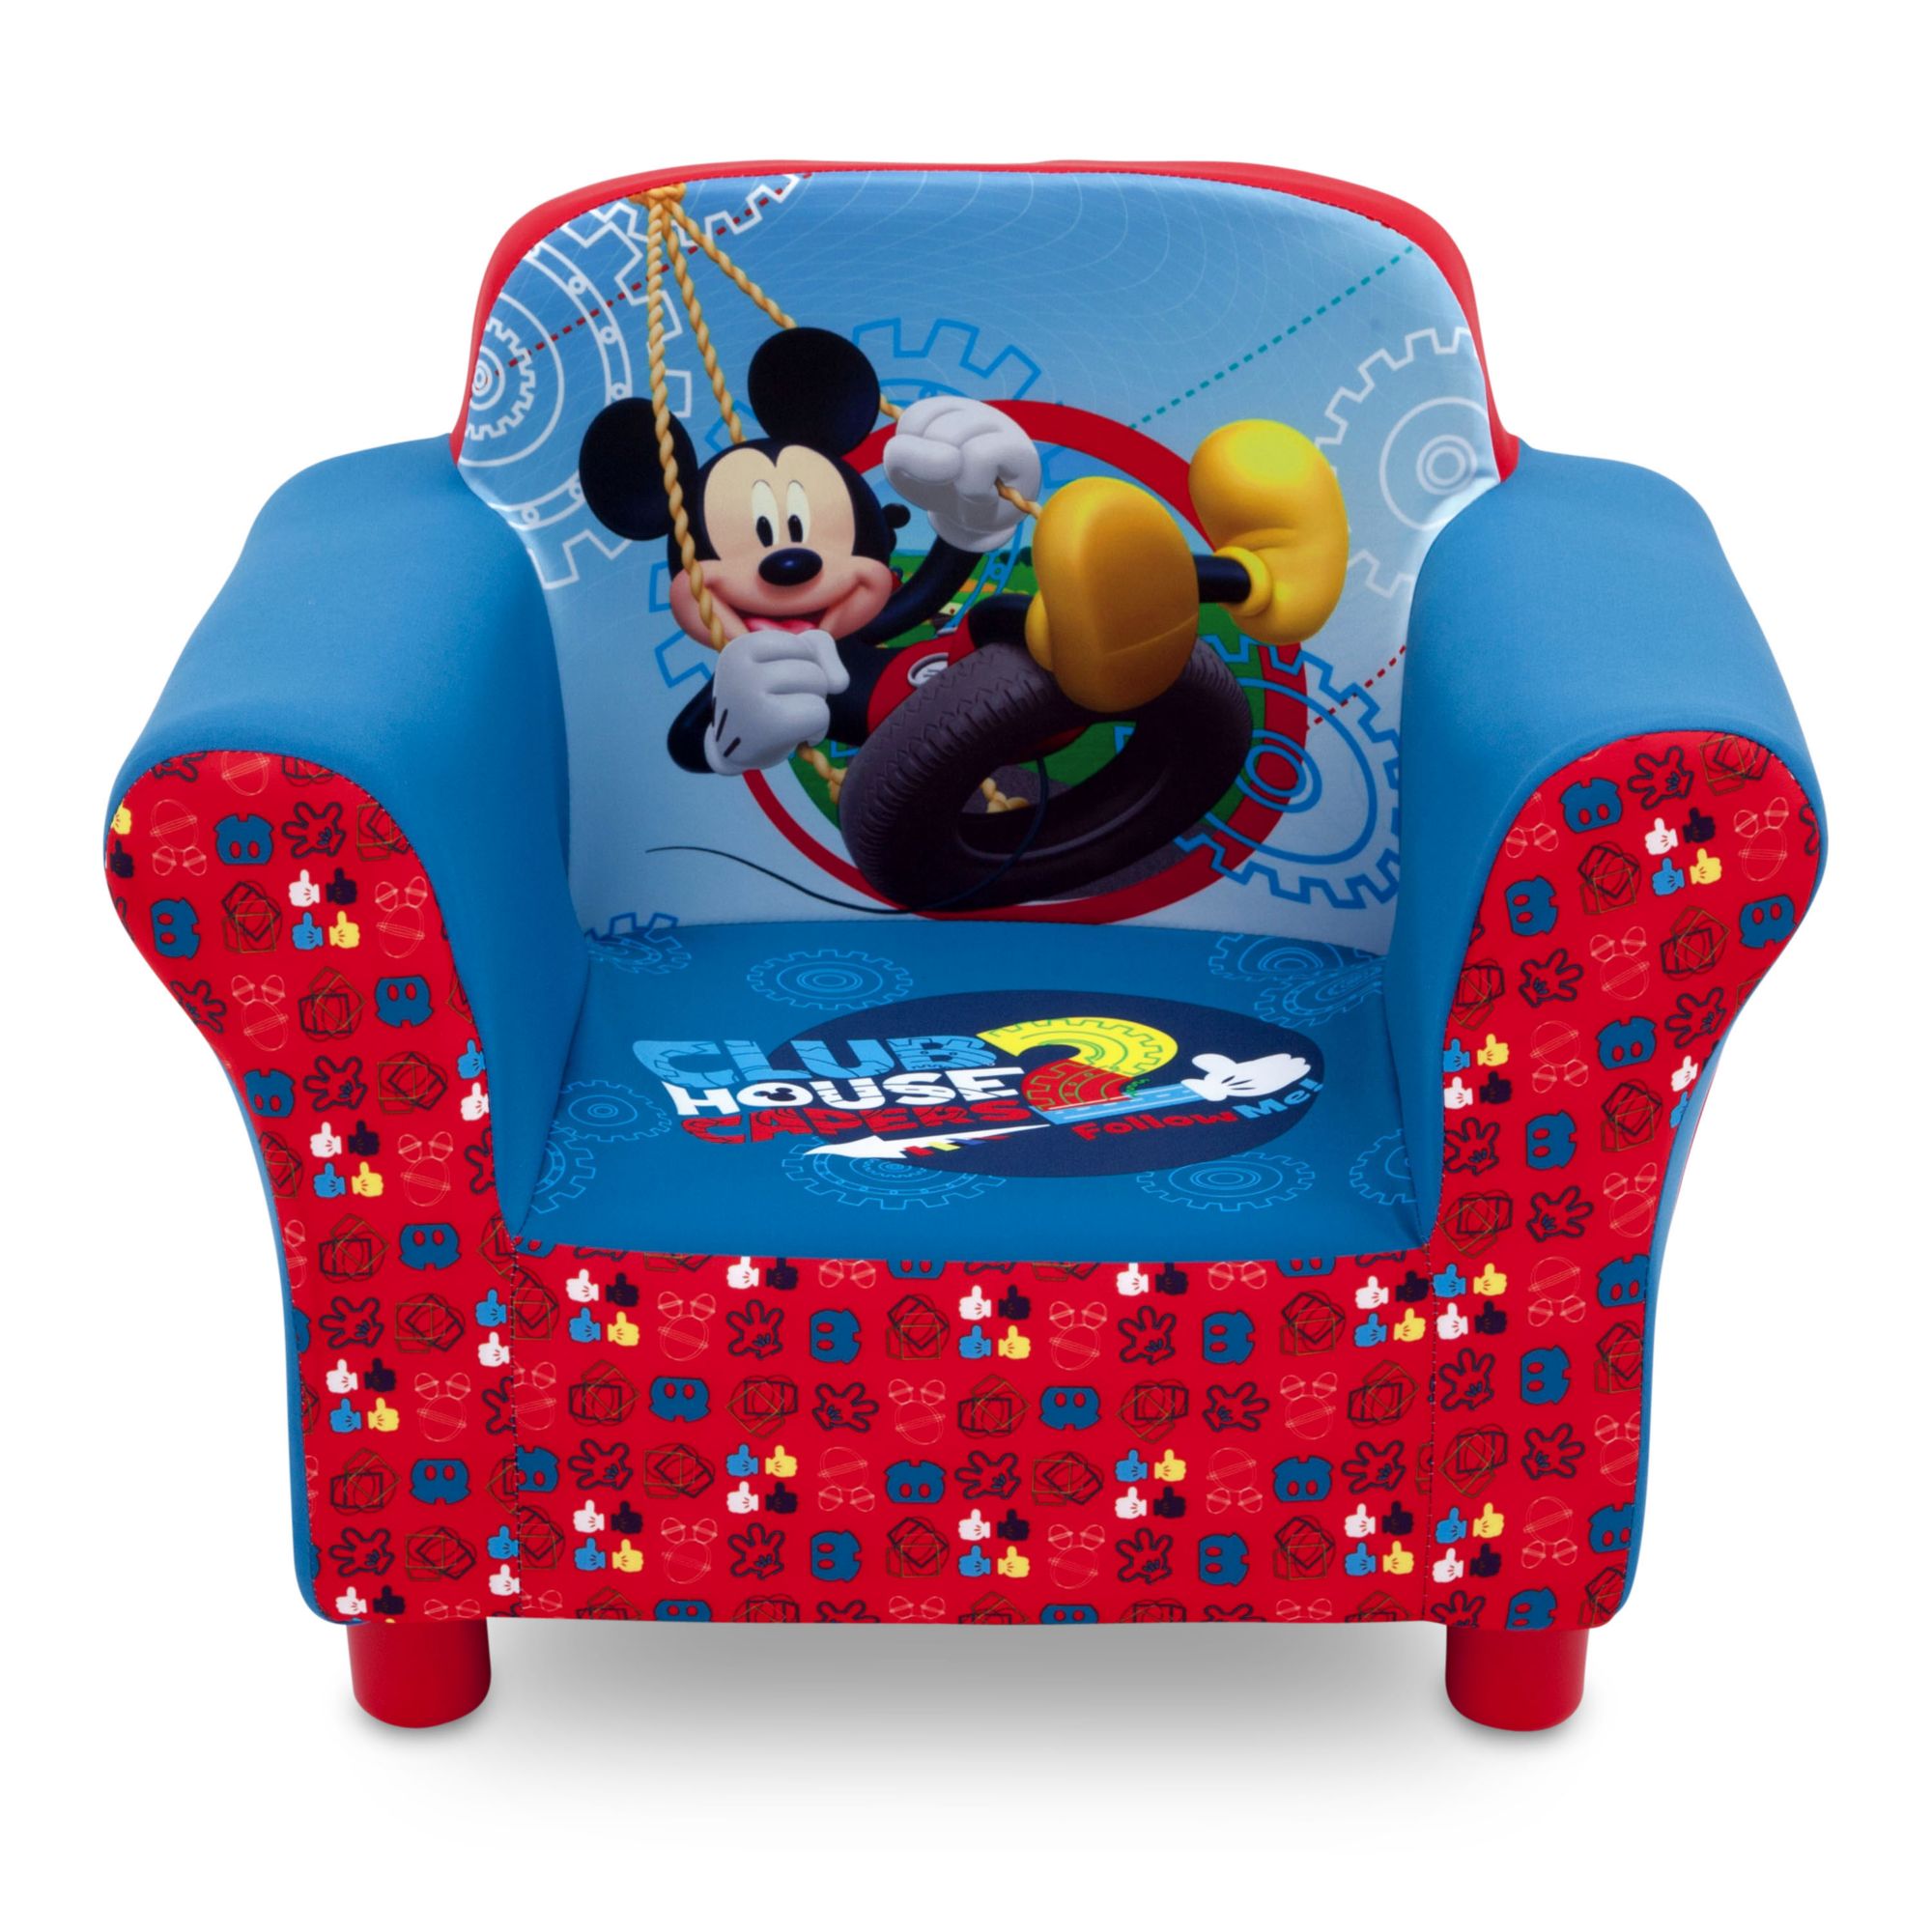 upholstered chairs for toddlers